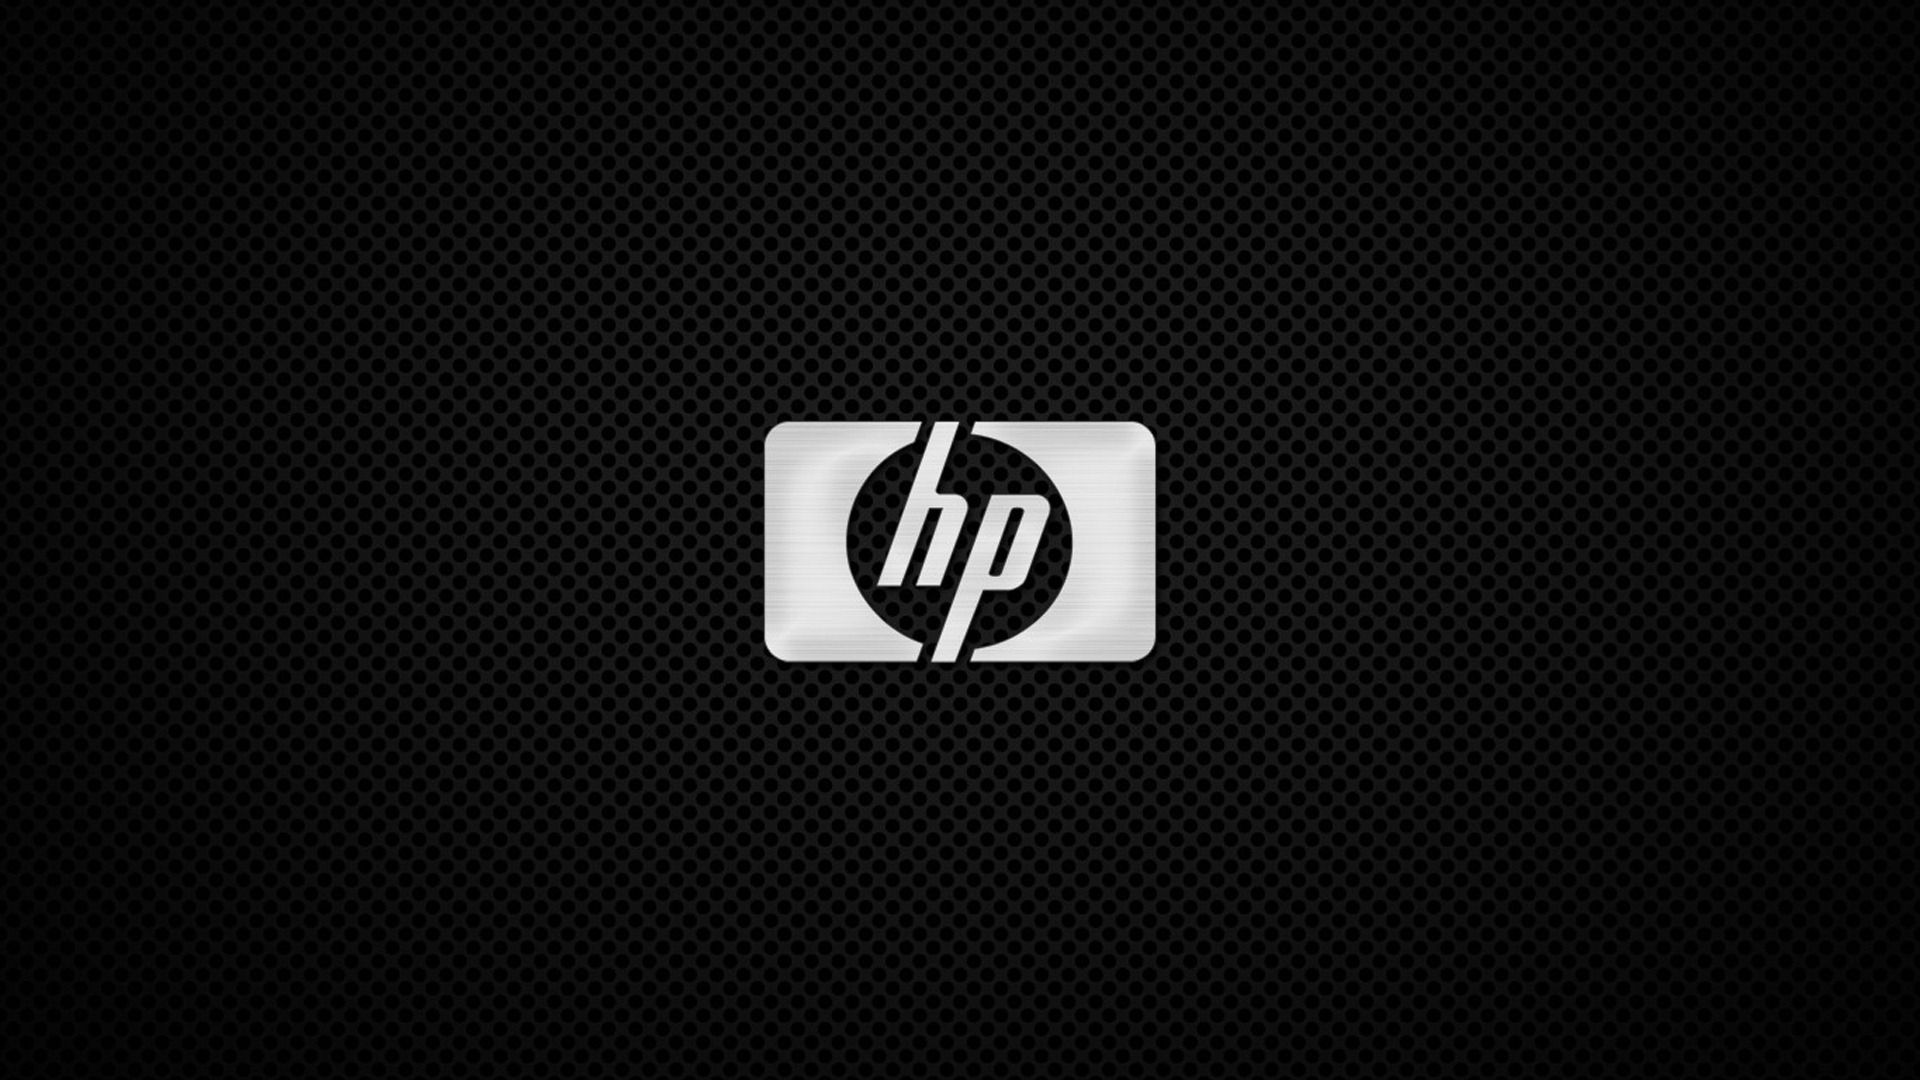 Awesome HP Wallpapers on WallpaperDog